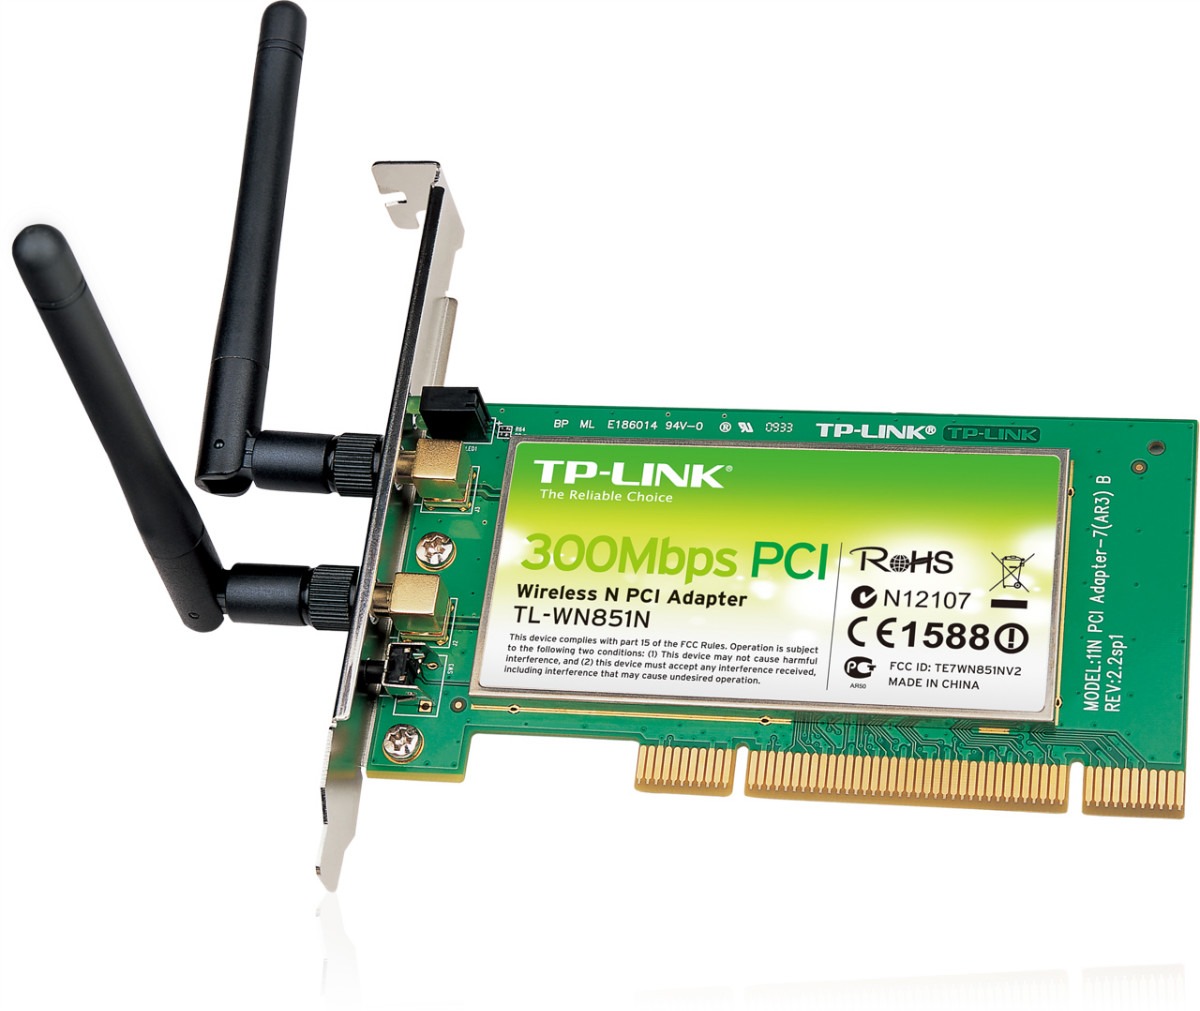 300Mbps Wireless N PCI Card TP-LINK TL-WN851ND